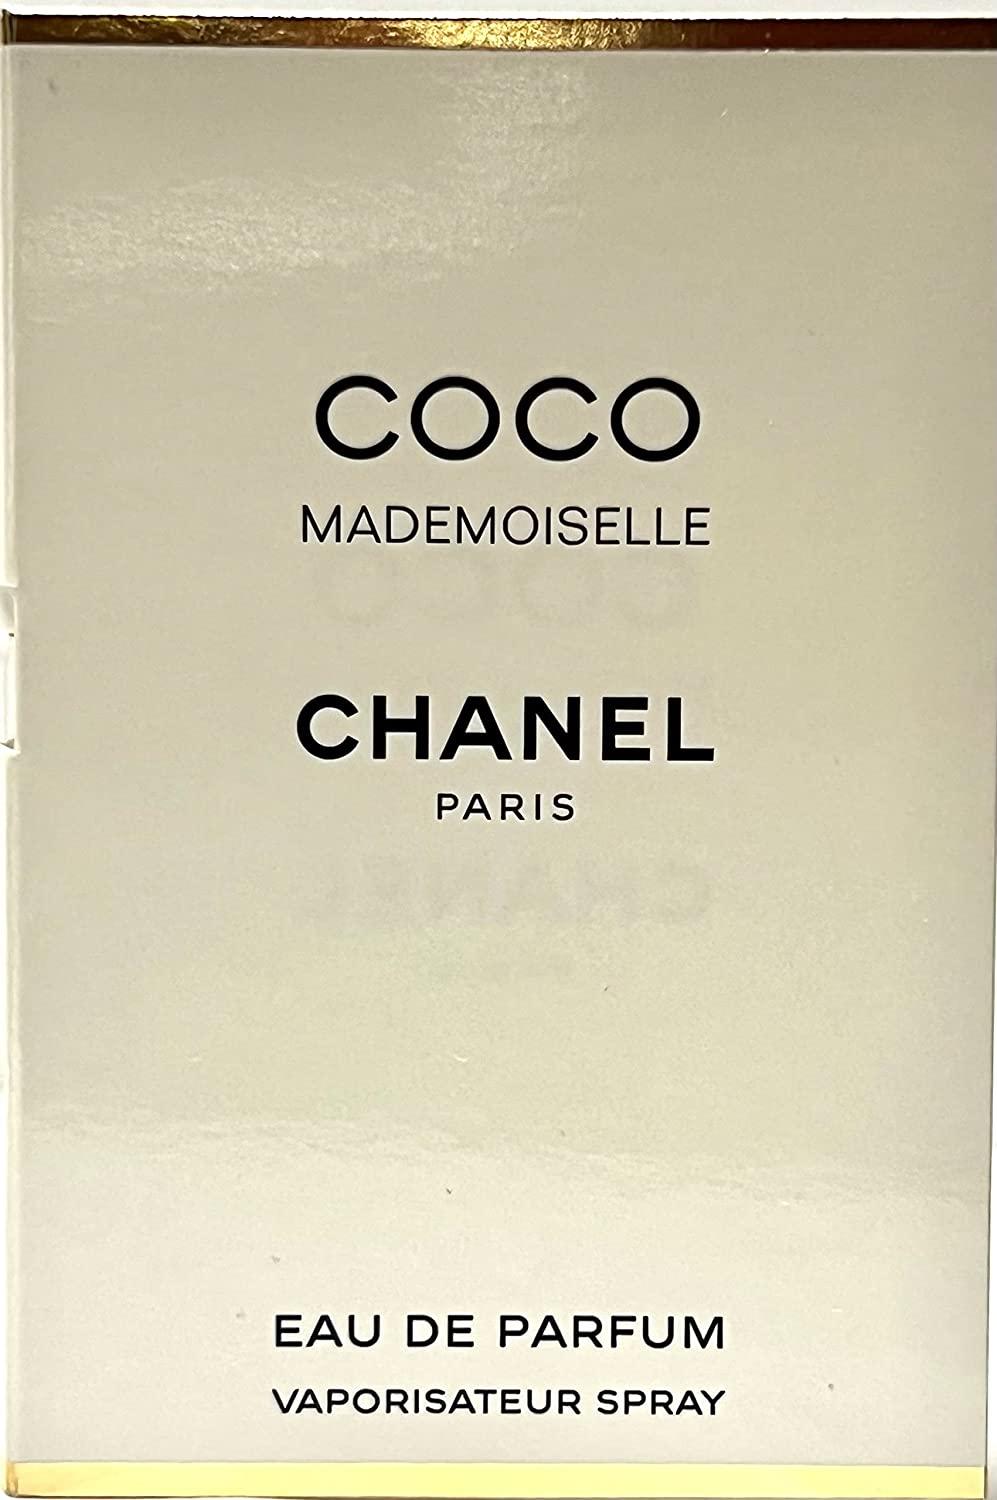 chanel coco mademoiselle notes